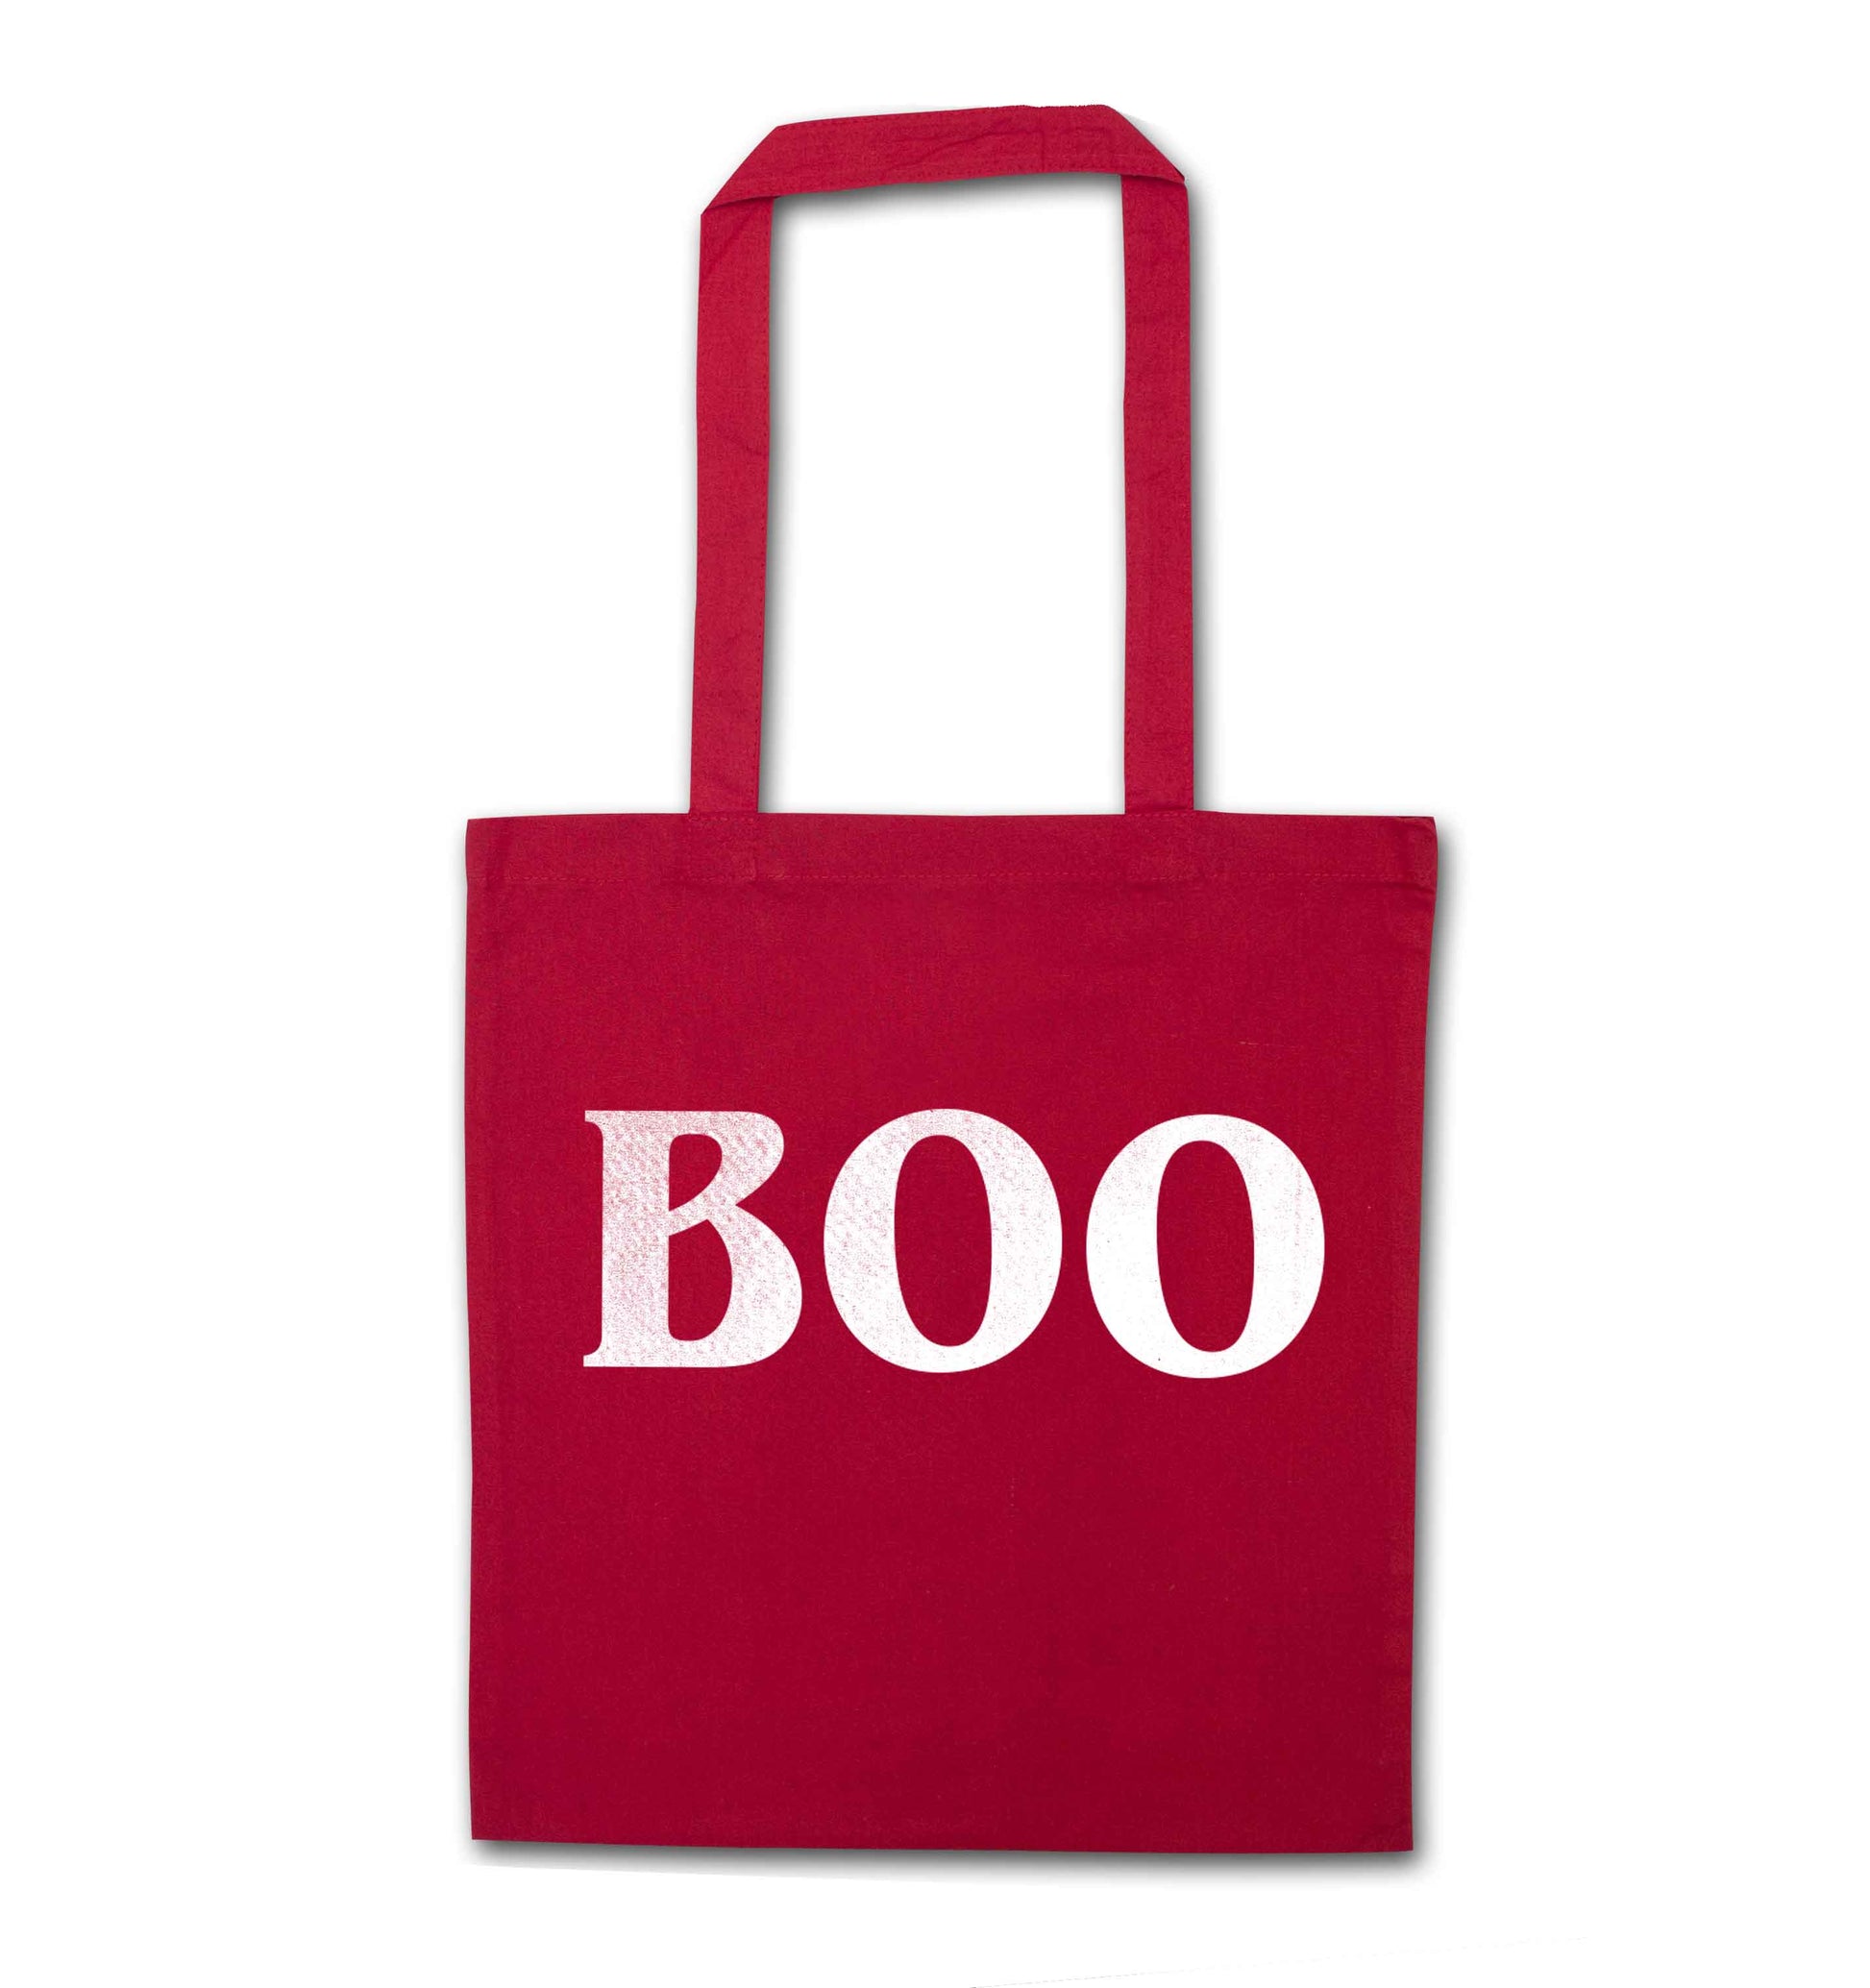 Boo red tote bag